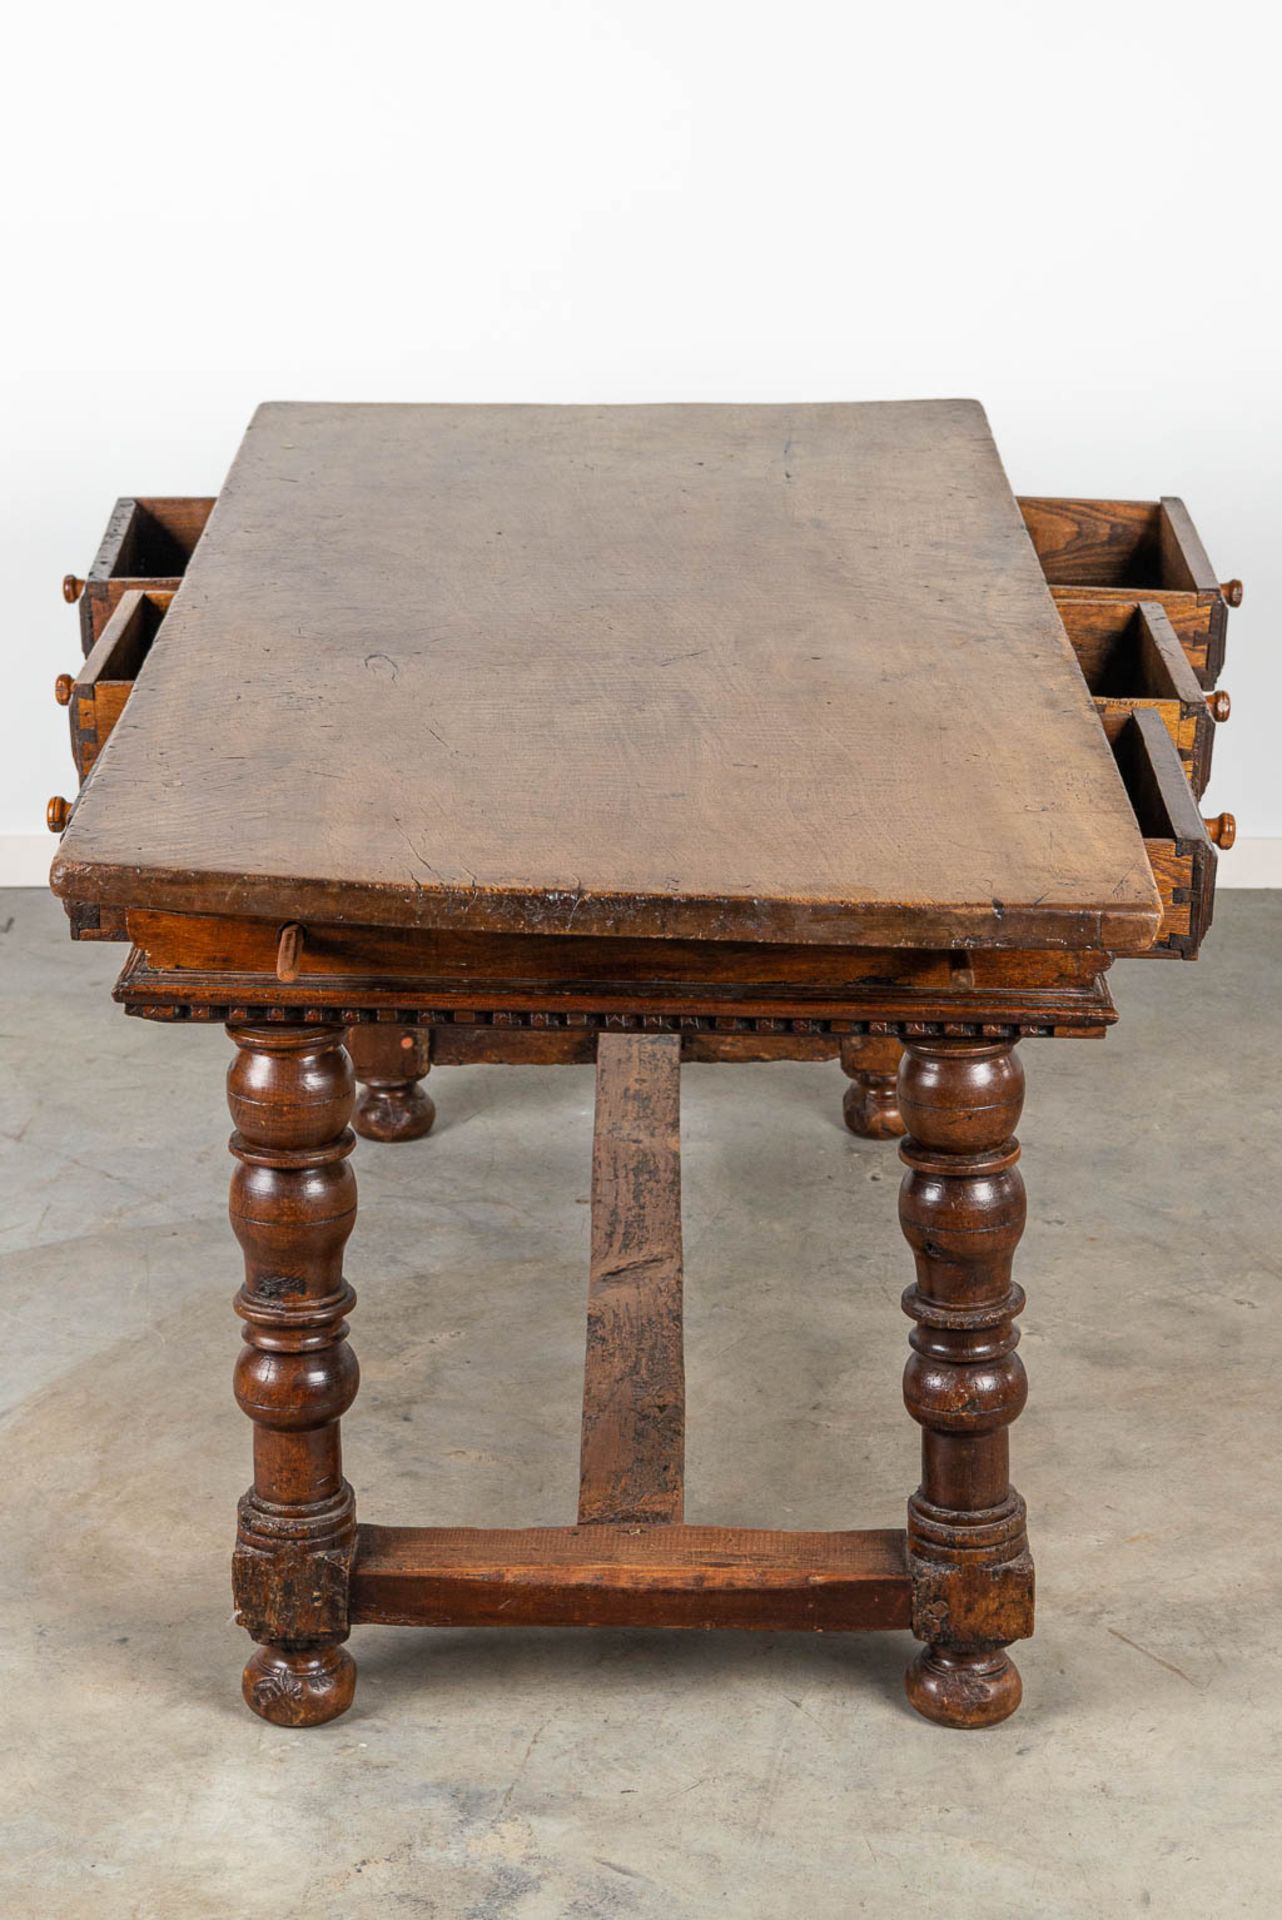 An antique table with 6 drawers, made during the 17th century. - Image 12 of 12